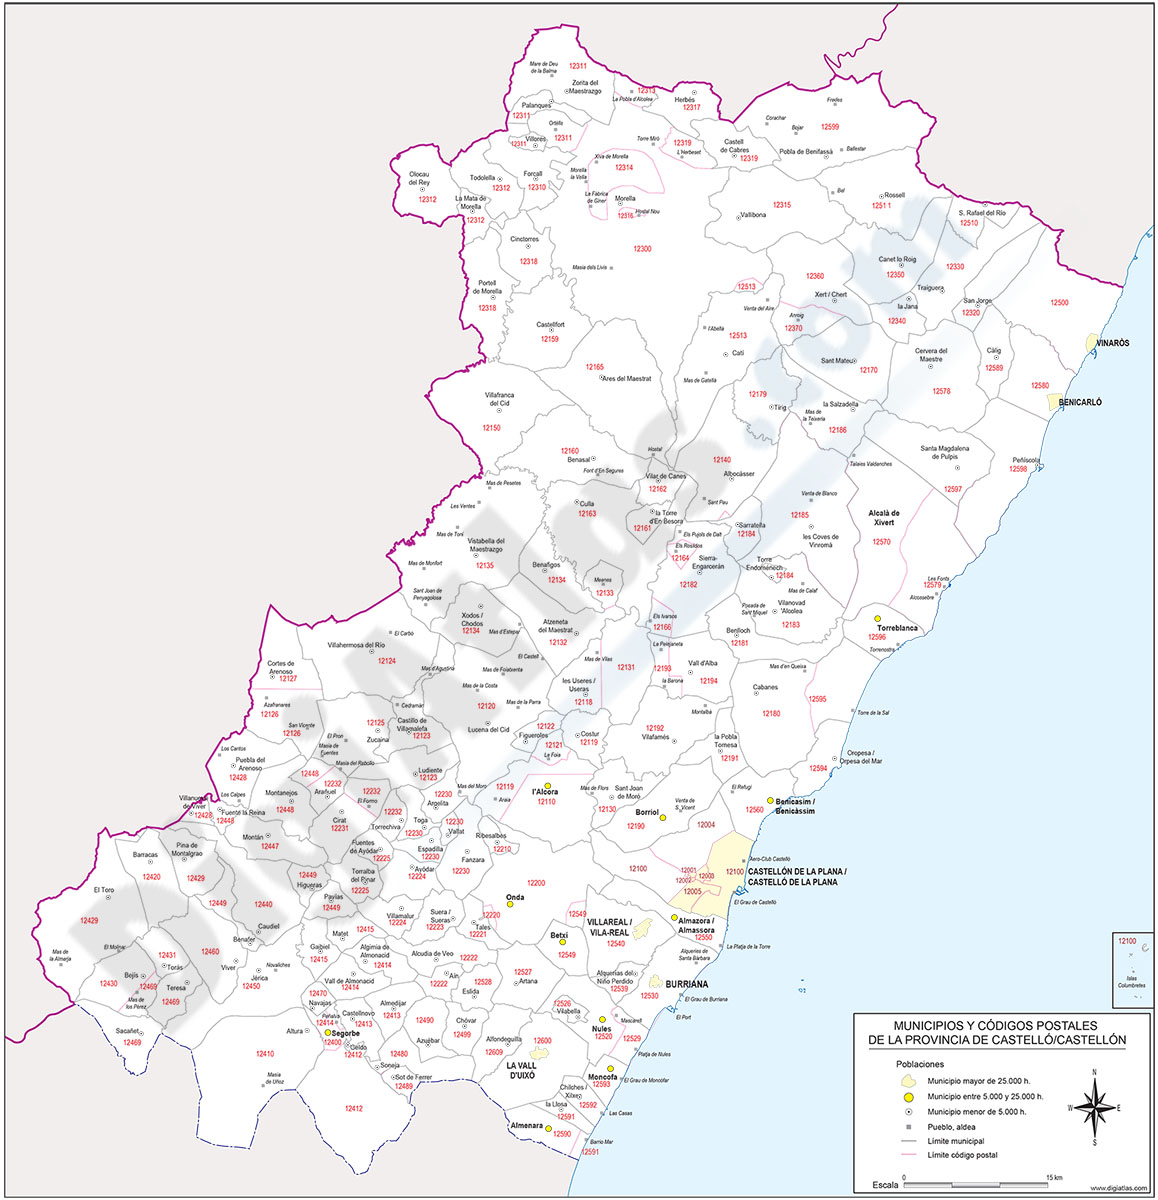 Map of Castellon province with municipalities and postal codes